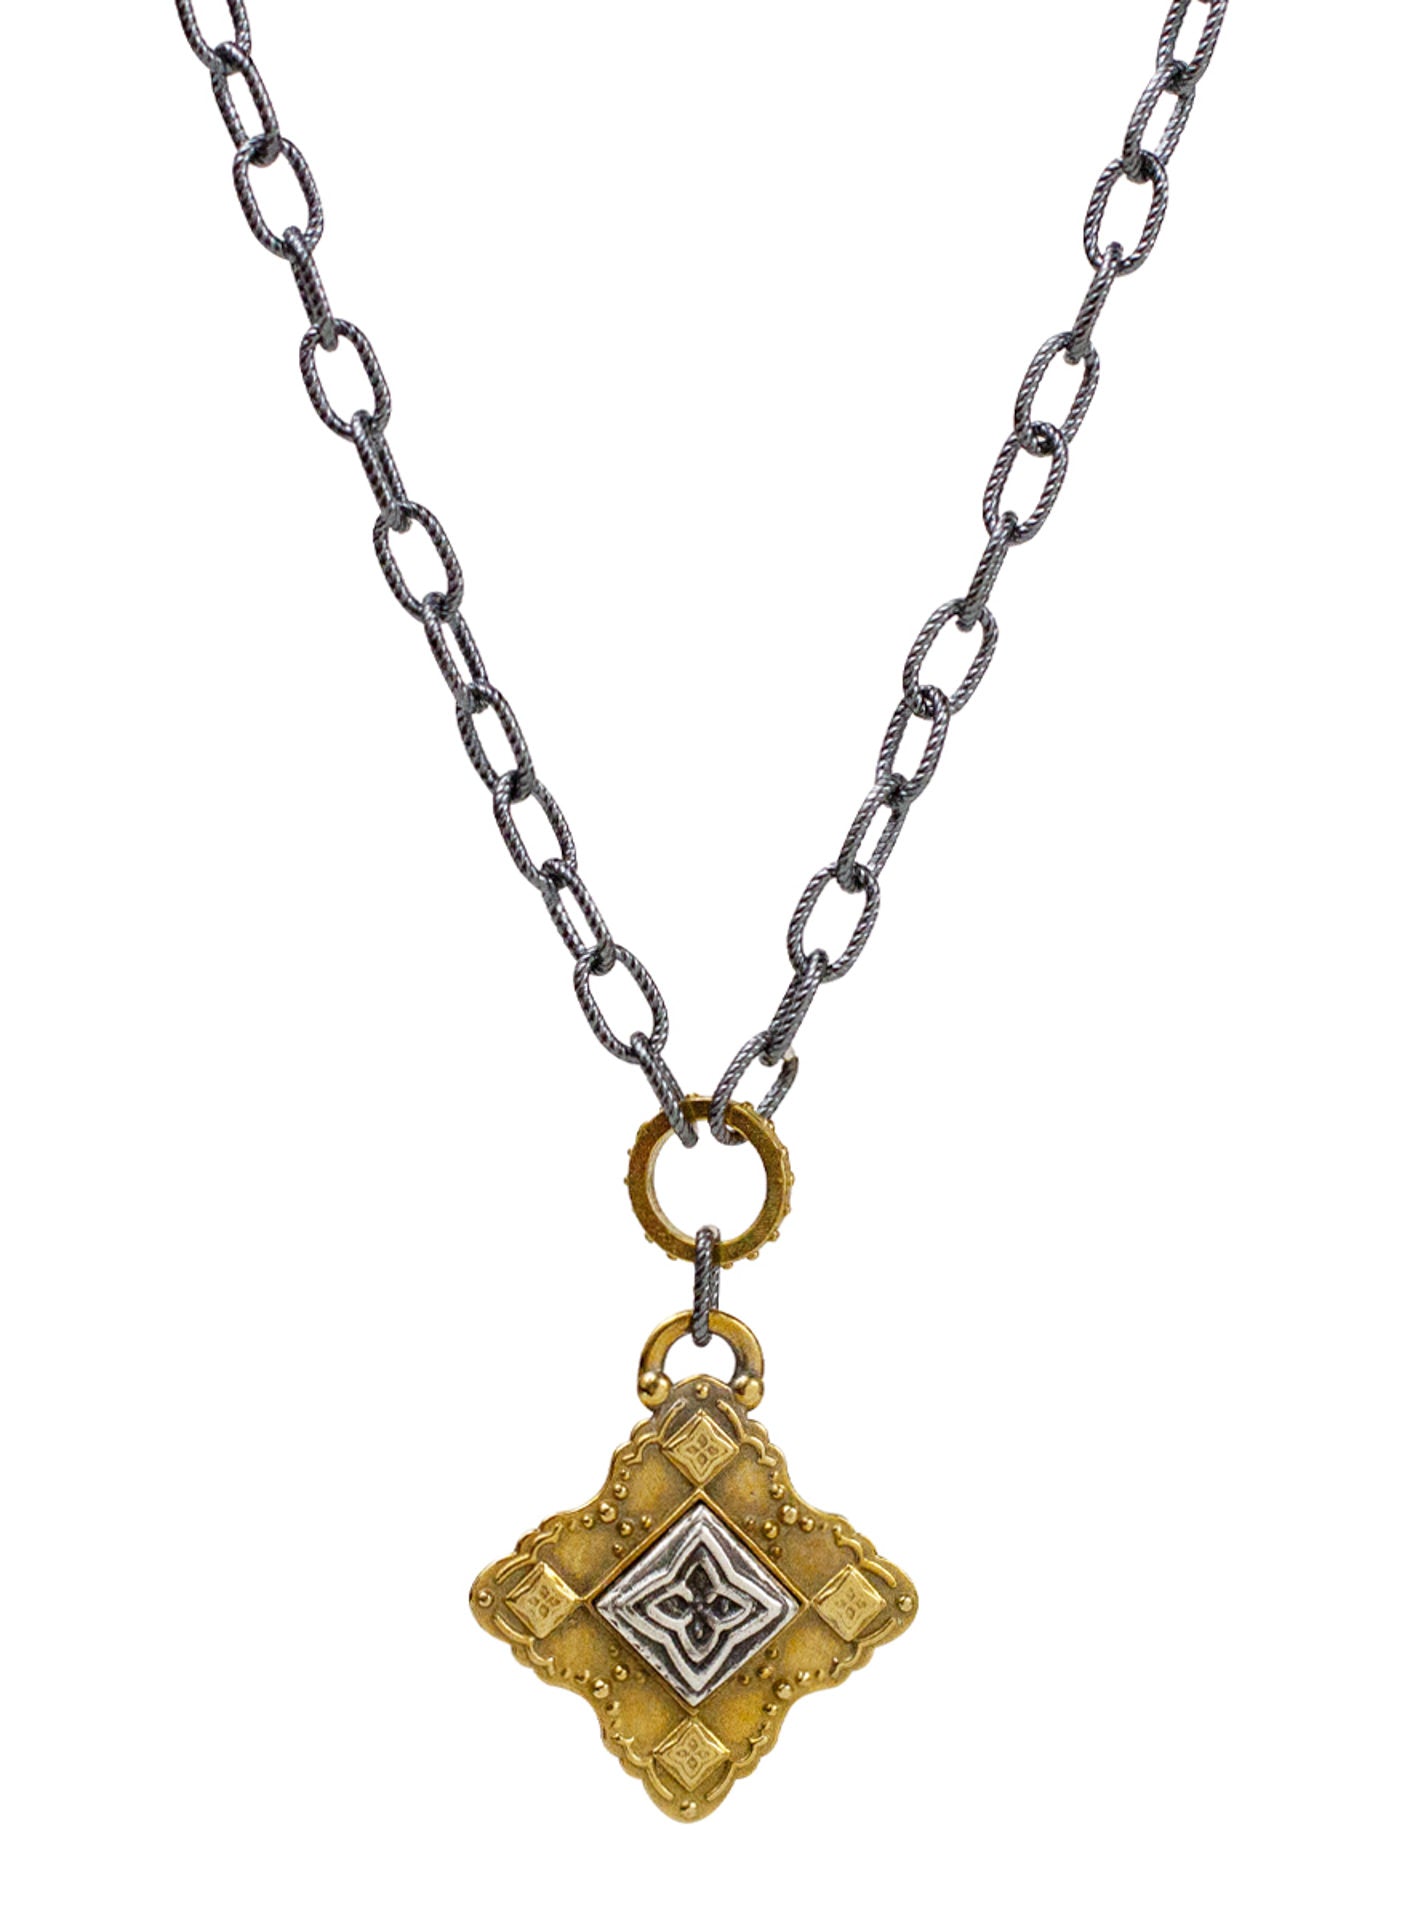 Channel Necklace - Samadhi "cosmic consciousness"